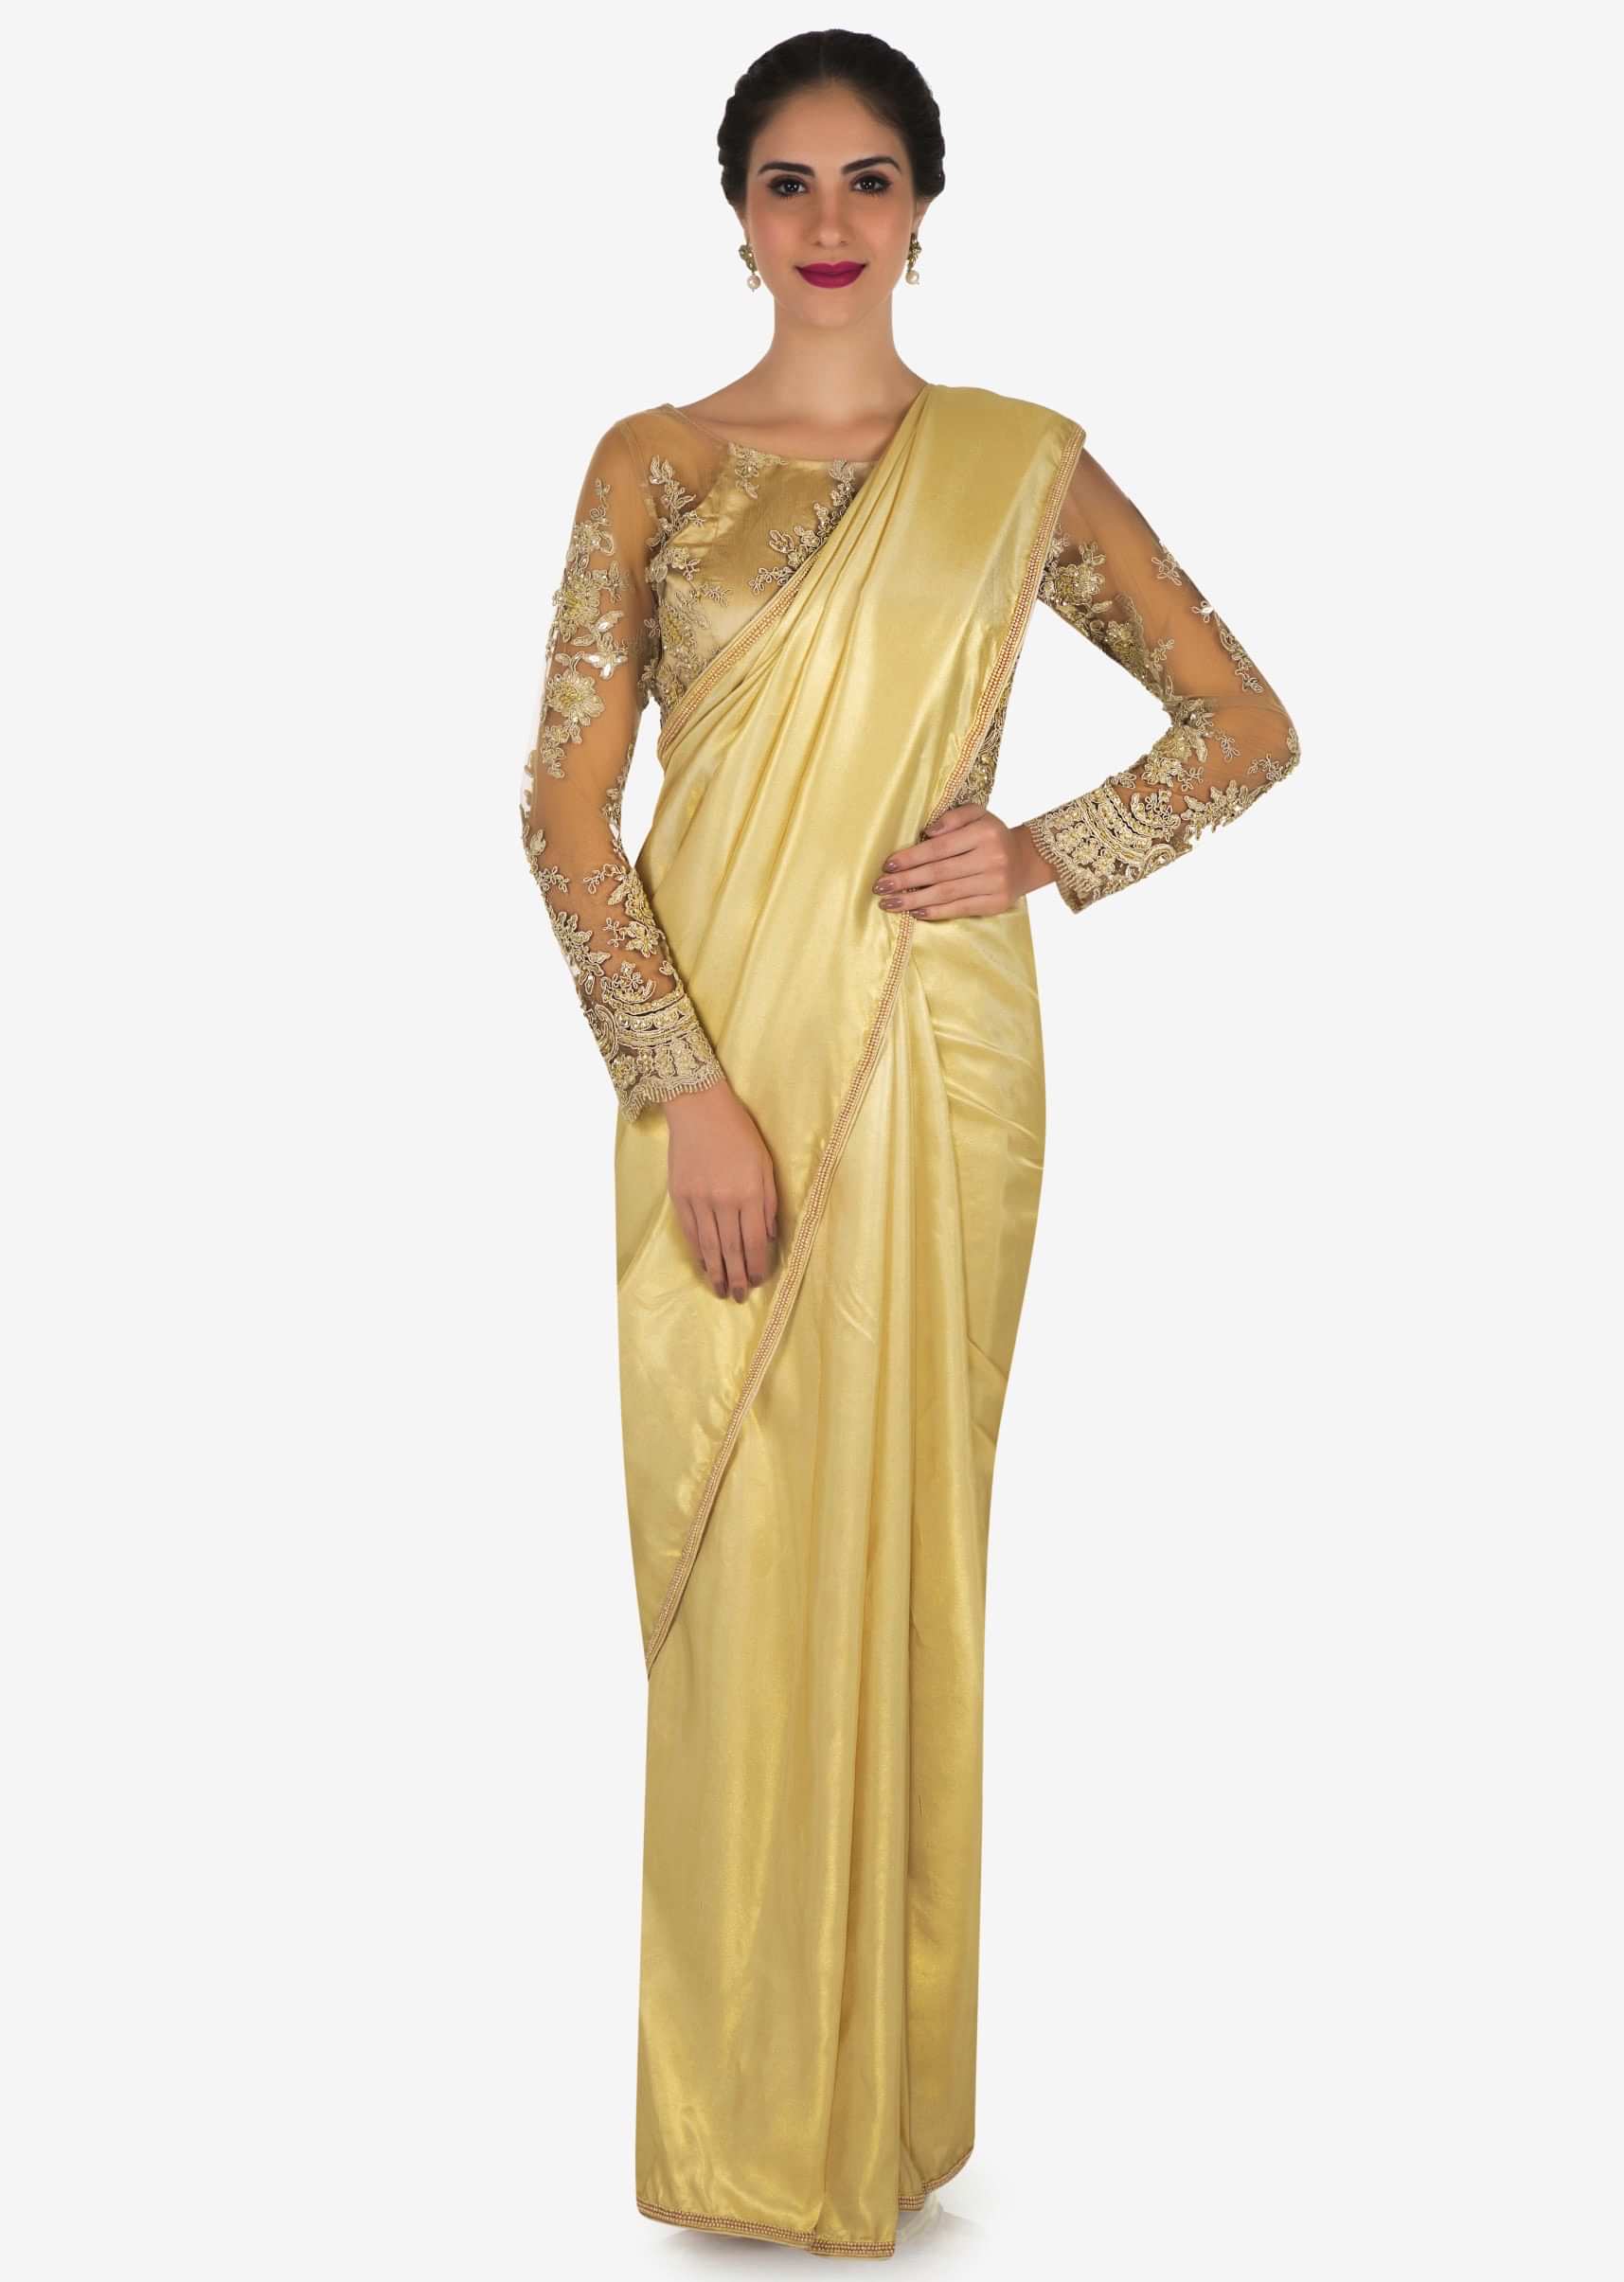 Cream Saree In Shimmer Foil With Moti Embroidered Work Online - Kalki Fashion